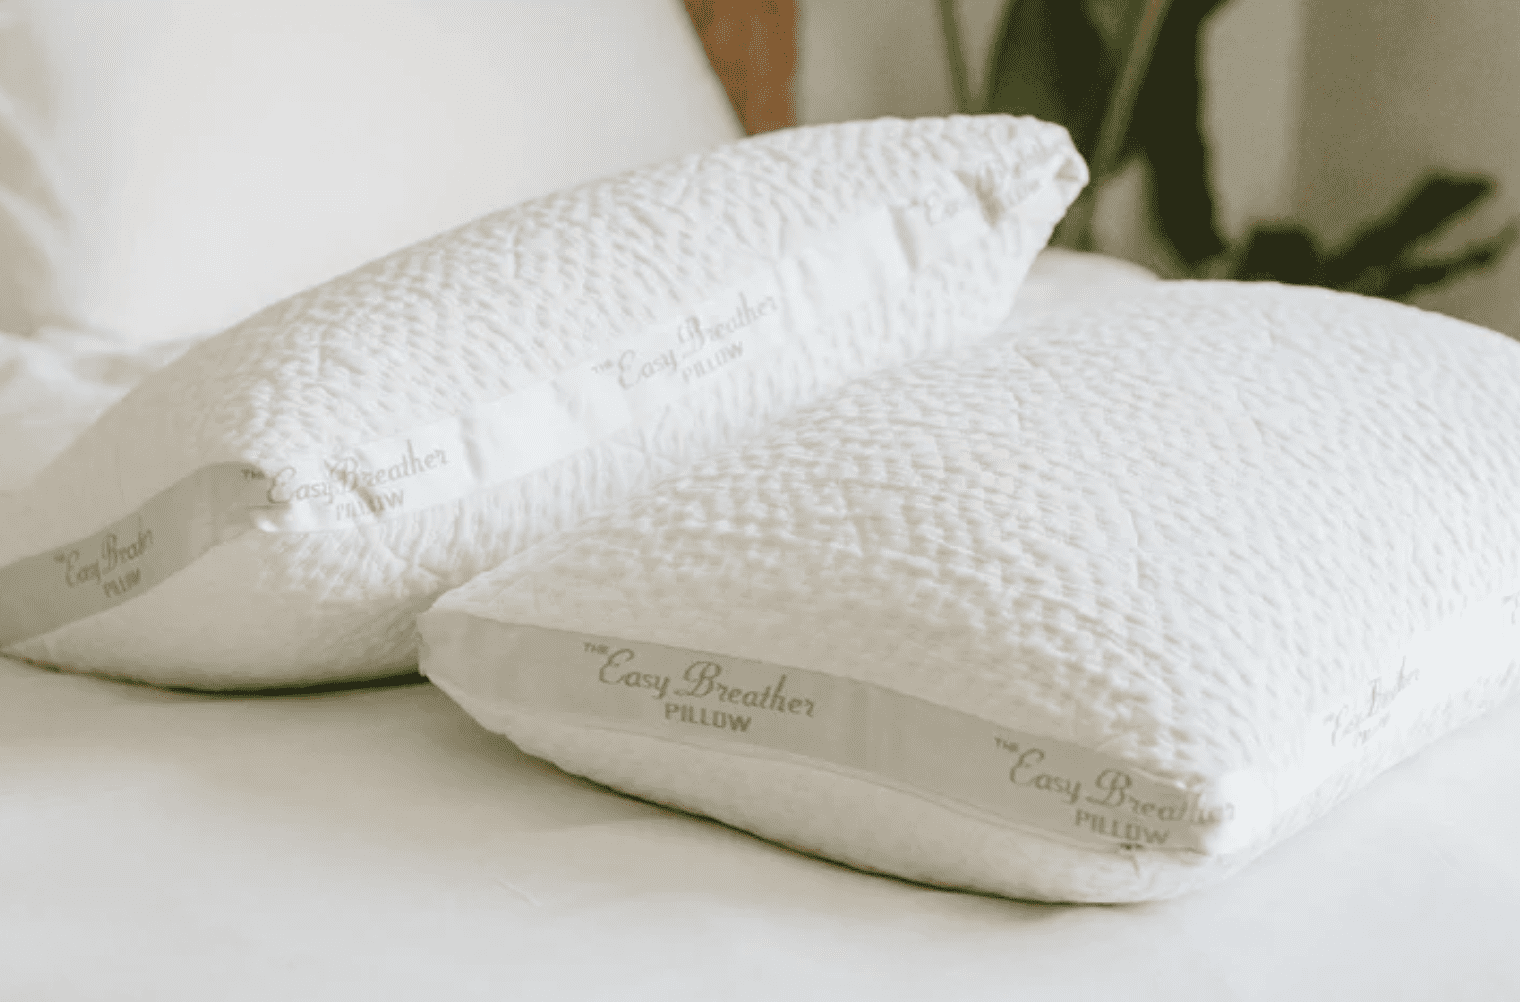 SpineAlign Review: Mattress Really Improves Posture?